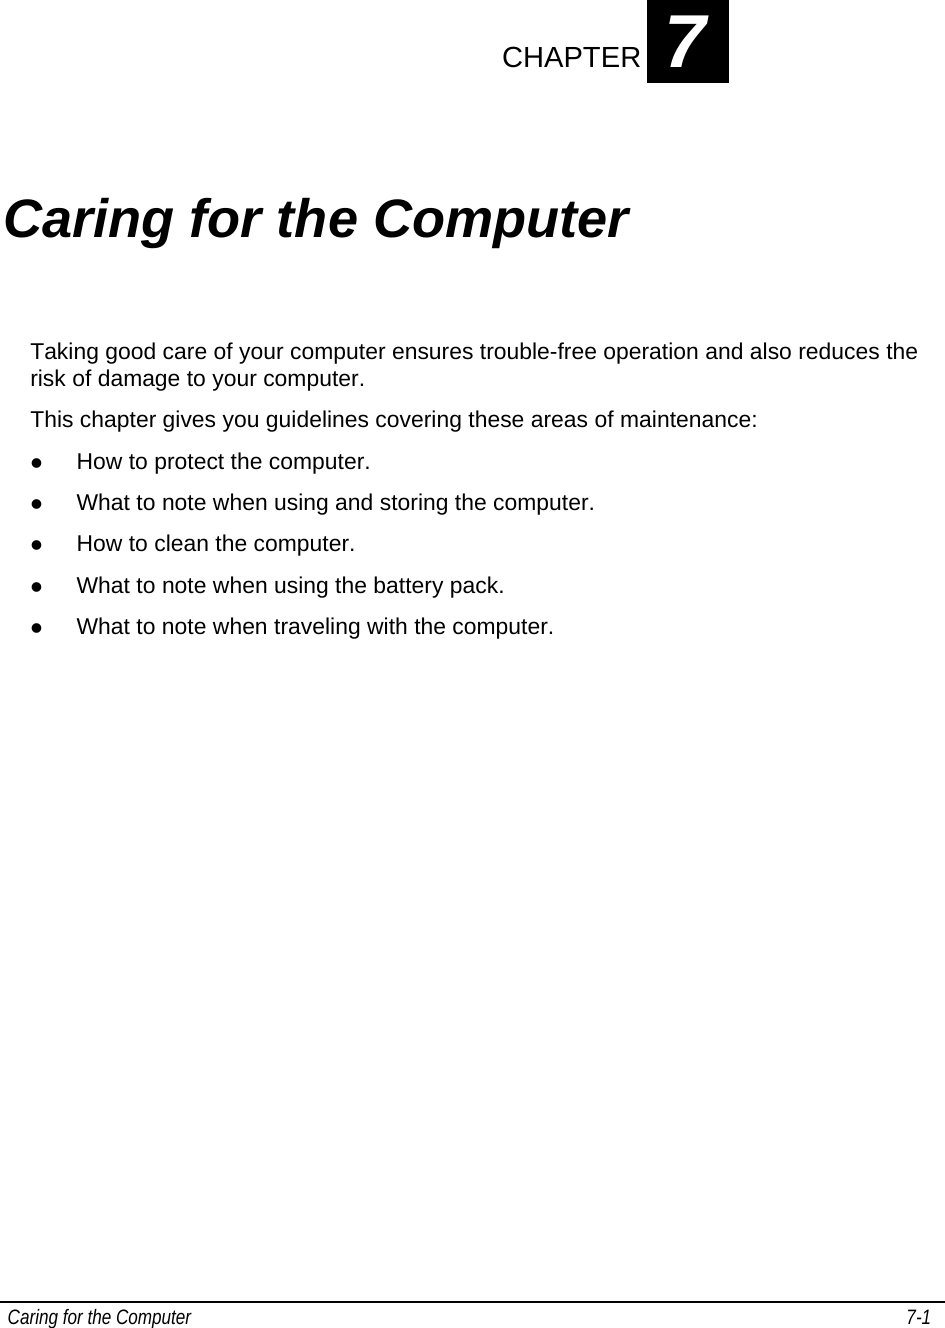  Caring for the Computer   7-1   CHAPTER 7   Caring for the Computer Taking good care of your computer ensures trouble-free operation and also reduces the risk of damage to your computer. This chapter gives you guidelines covering these areas of maintenance: z How to protect the computer. z What to note when using and storing the computer. z How to clean the computer. z What to note when using the battery pack. z What to note when traveling with the computer. 